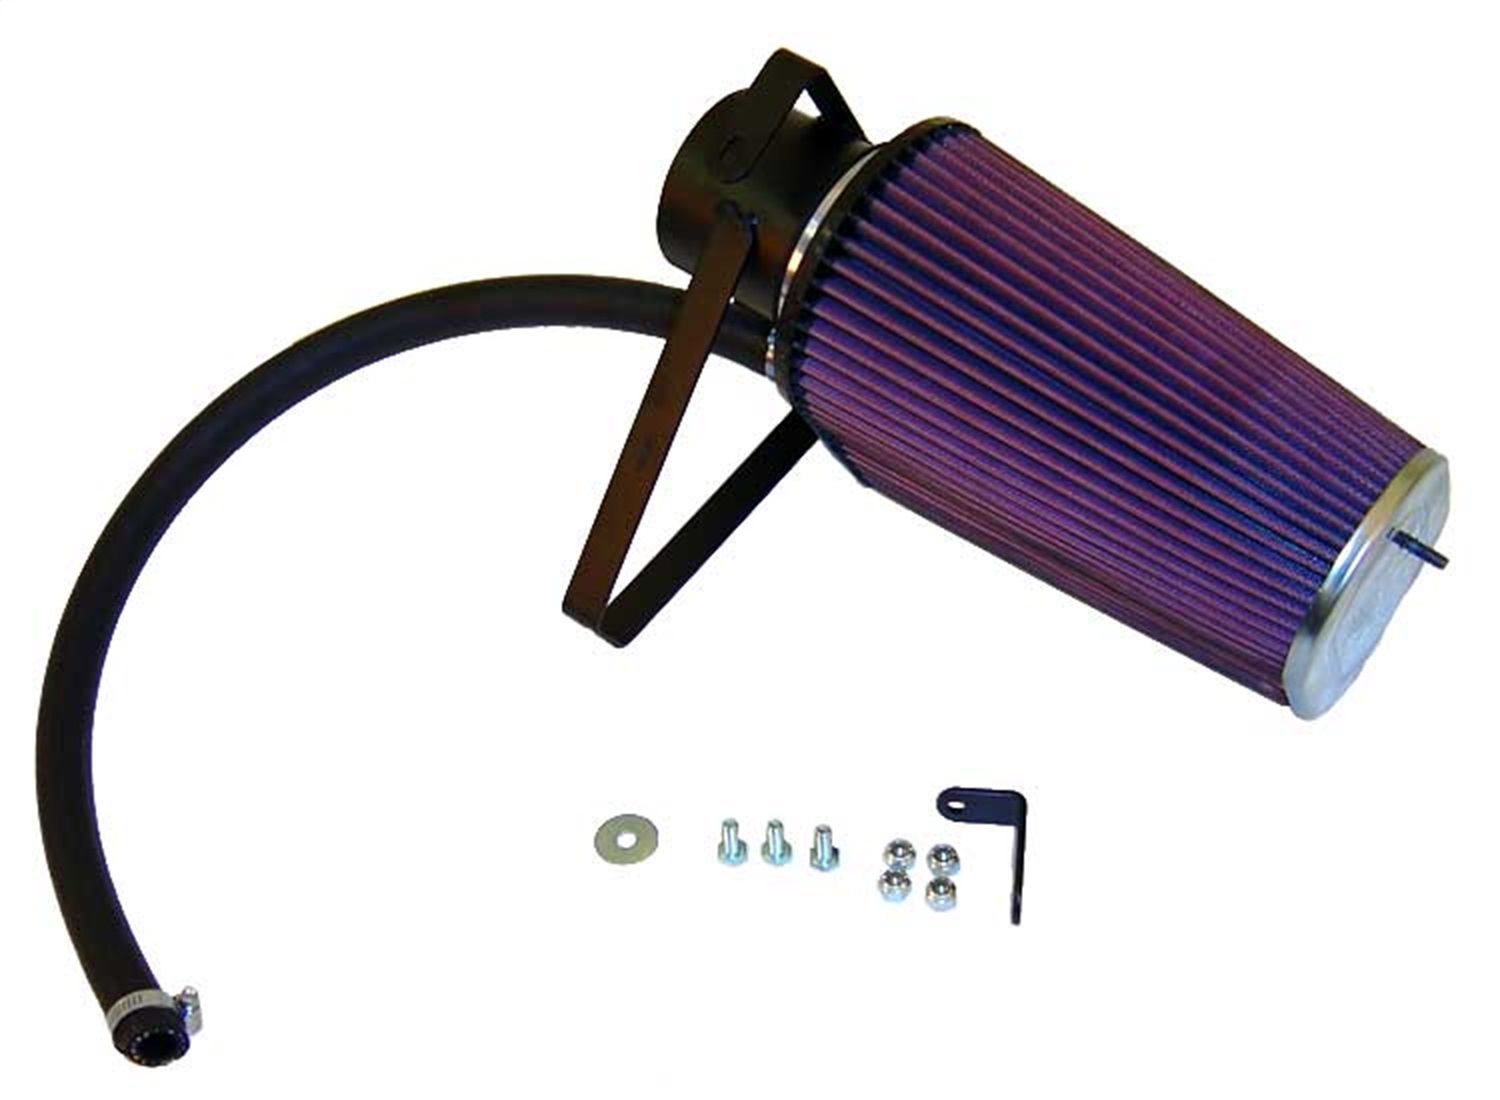 K&N Filters K&N Filters 57-2503 Filtercharger Injection Performance Kit